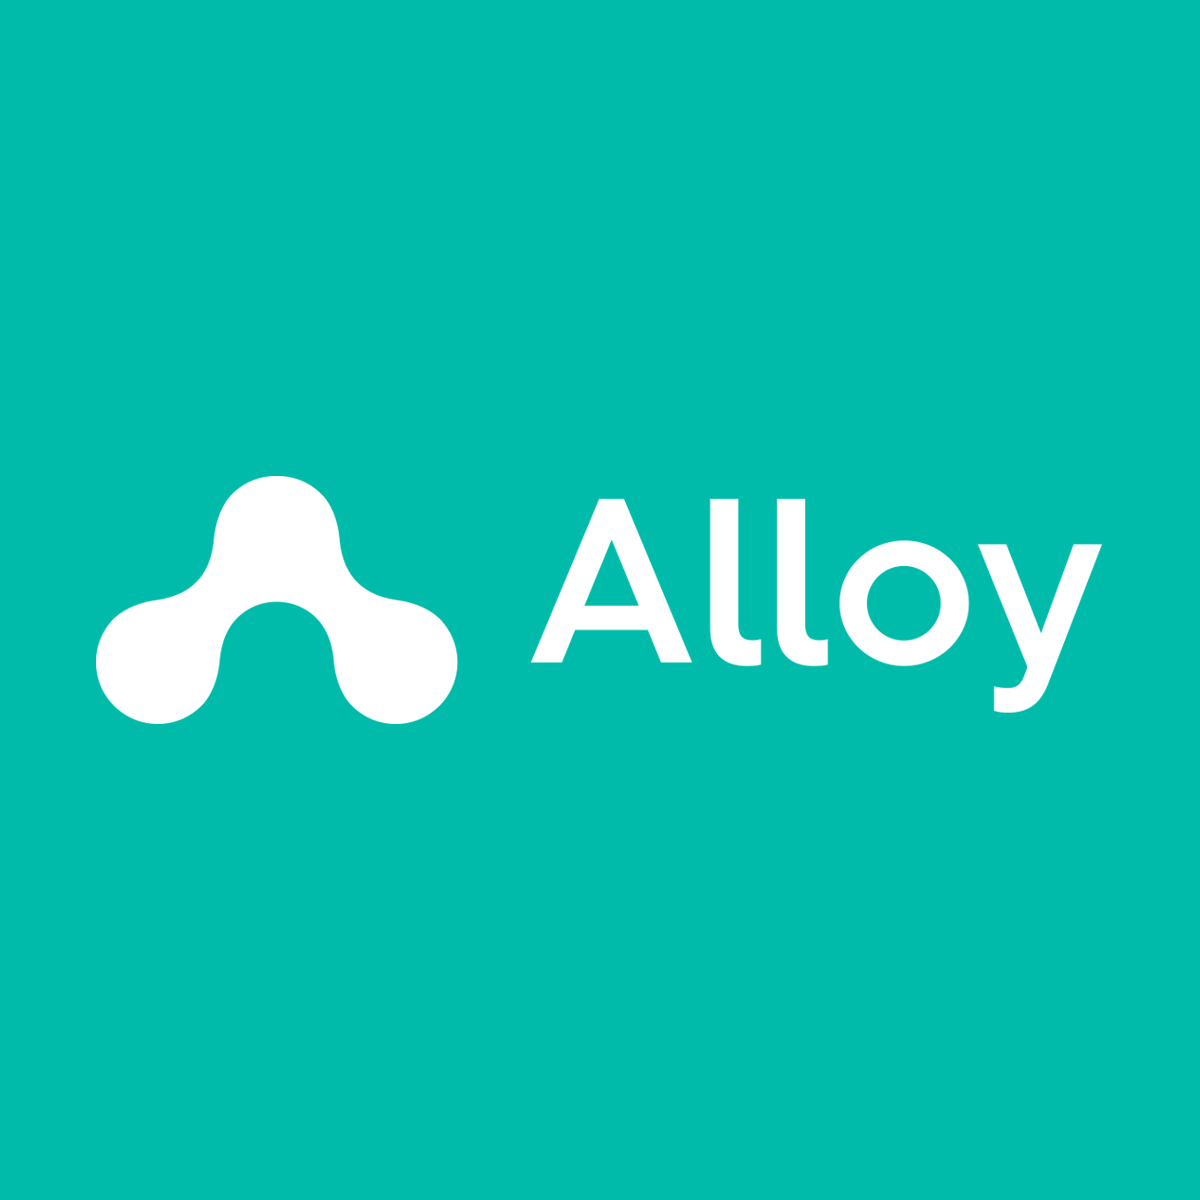 Alloy Logo - Alloy - Solutions Consultant